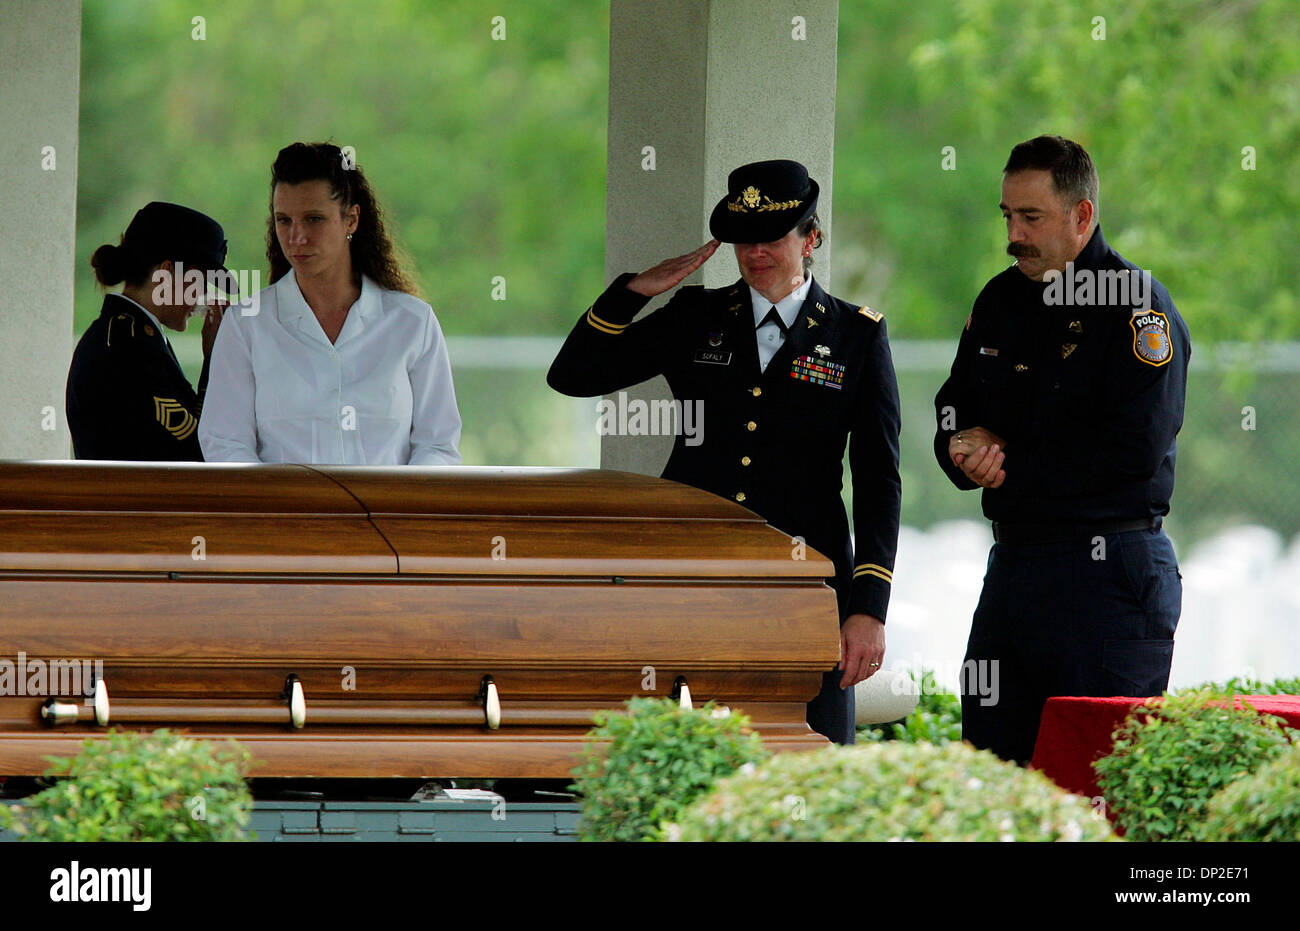 May 31, 2006; San Antonio, TX, USA; Mourners pay their last respect following the graveside service for Lt. Col. Daniel E. Holland Wednesday, May 31, 2006 at Fort Sam Houston National Cemetery. Mandatory Credit: Photo by Bahram Mark Sobhani/San Antonio Express-News/ZUMA Press. (©) Copyright 2006 by San Antonio Express-News Stock Photo